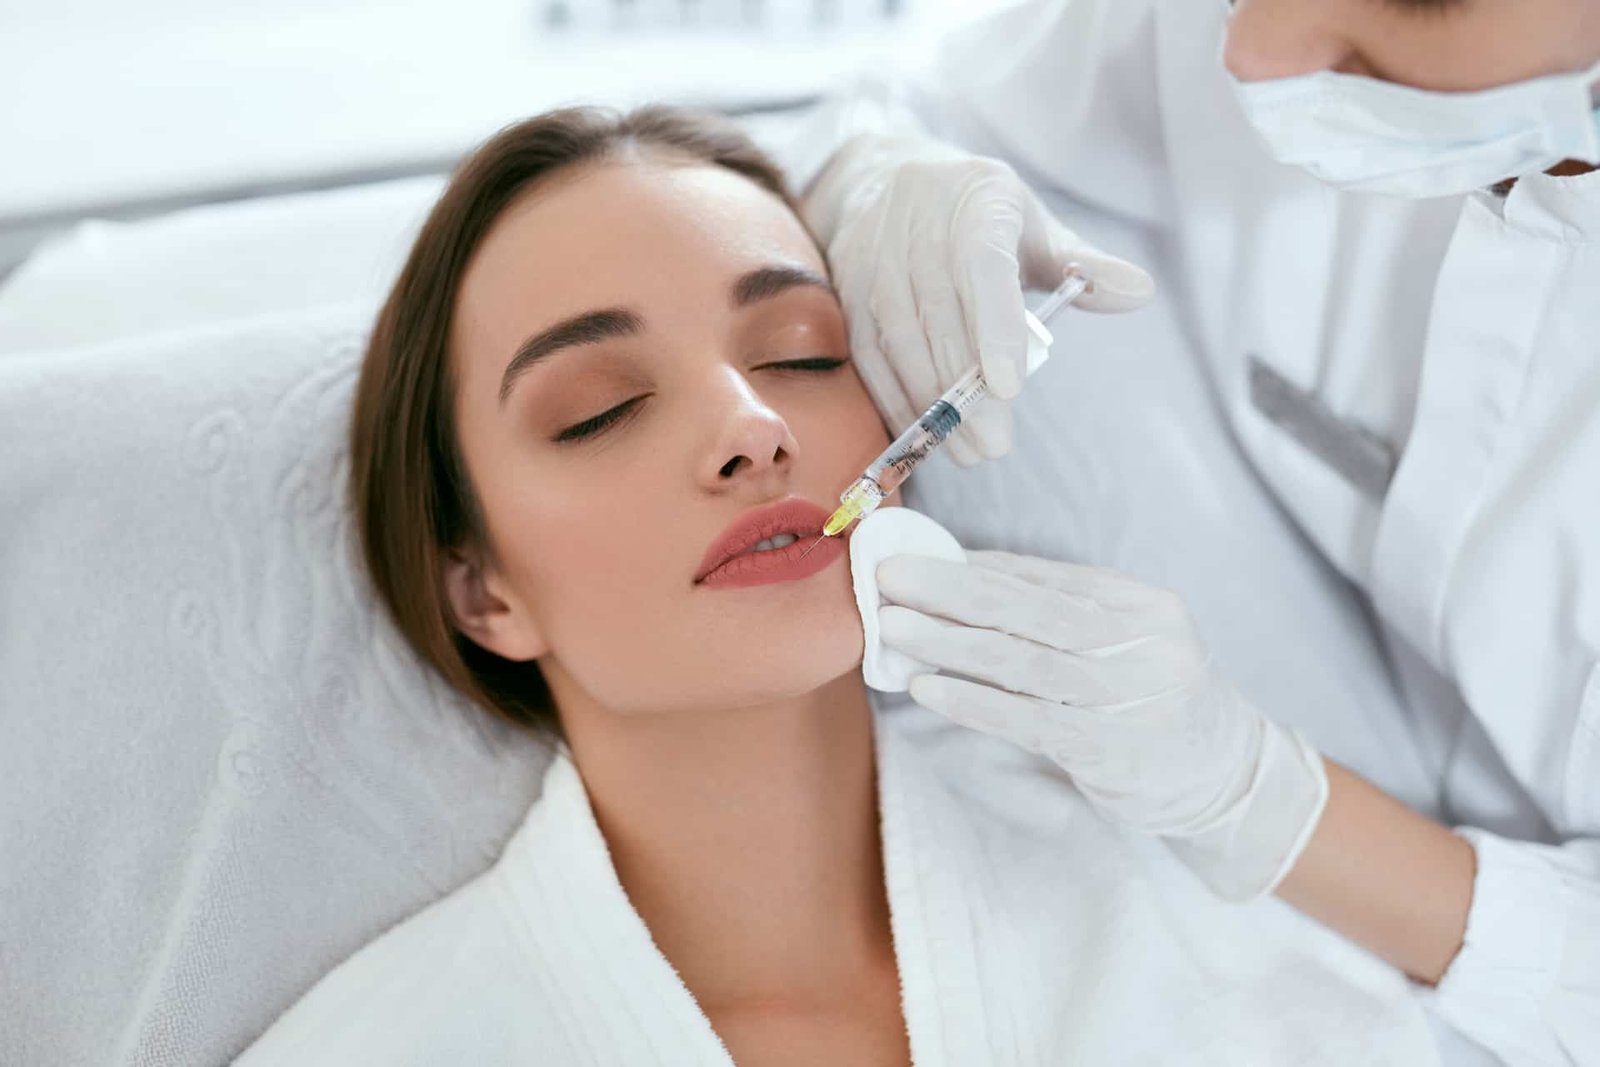 Lip Augmentation. Woman Getting Beauty Injection For Lips, Facial Beauty Procedure. High Resolution